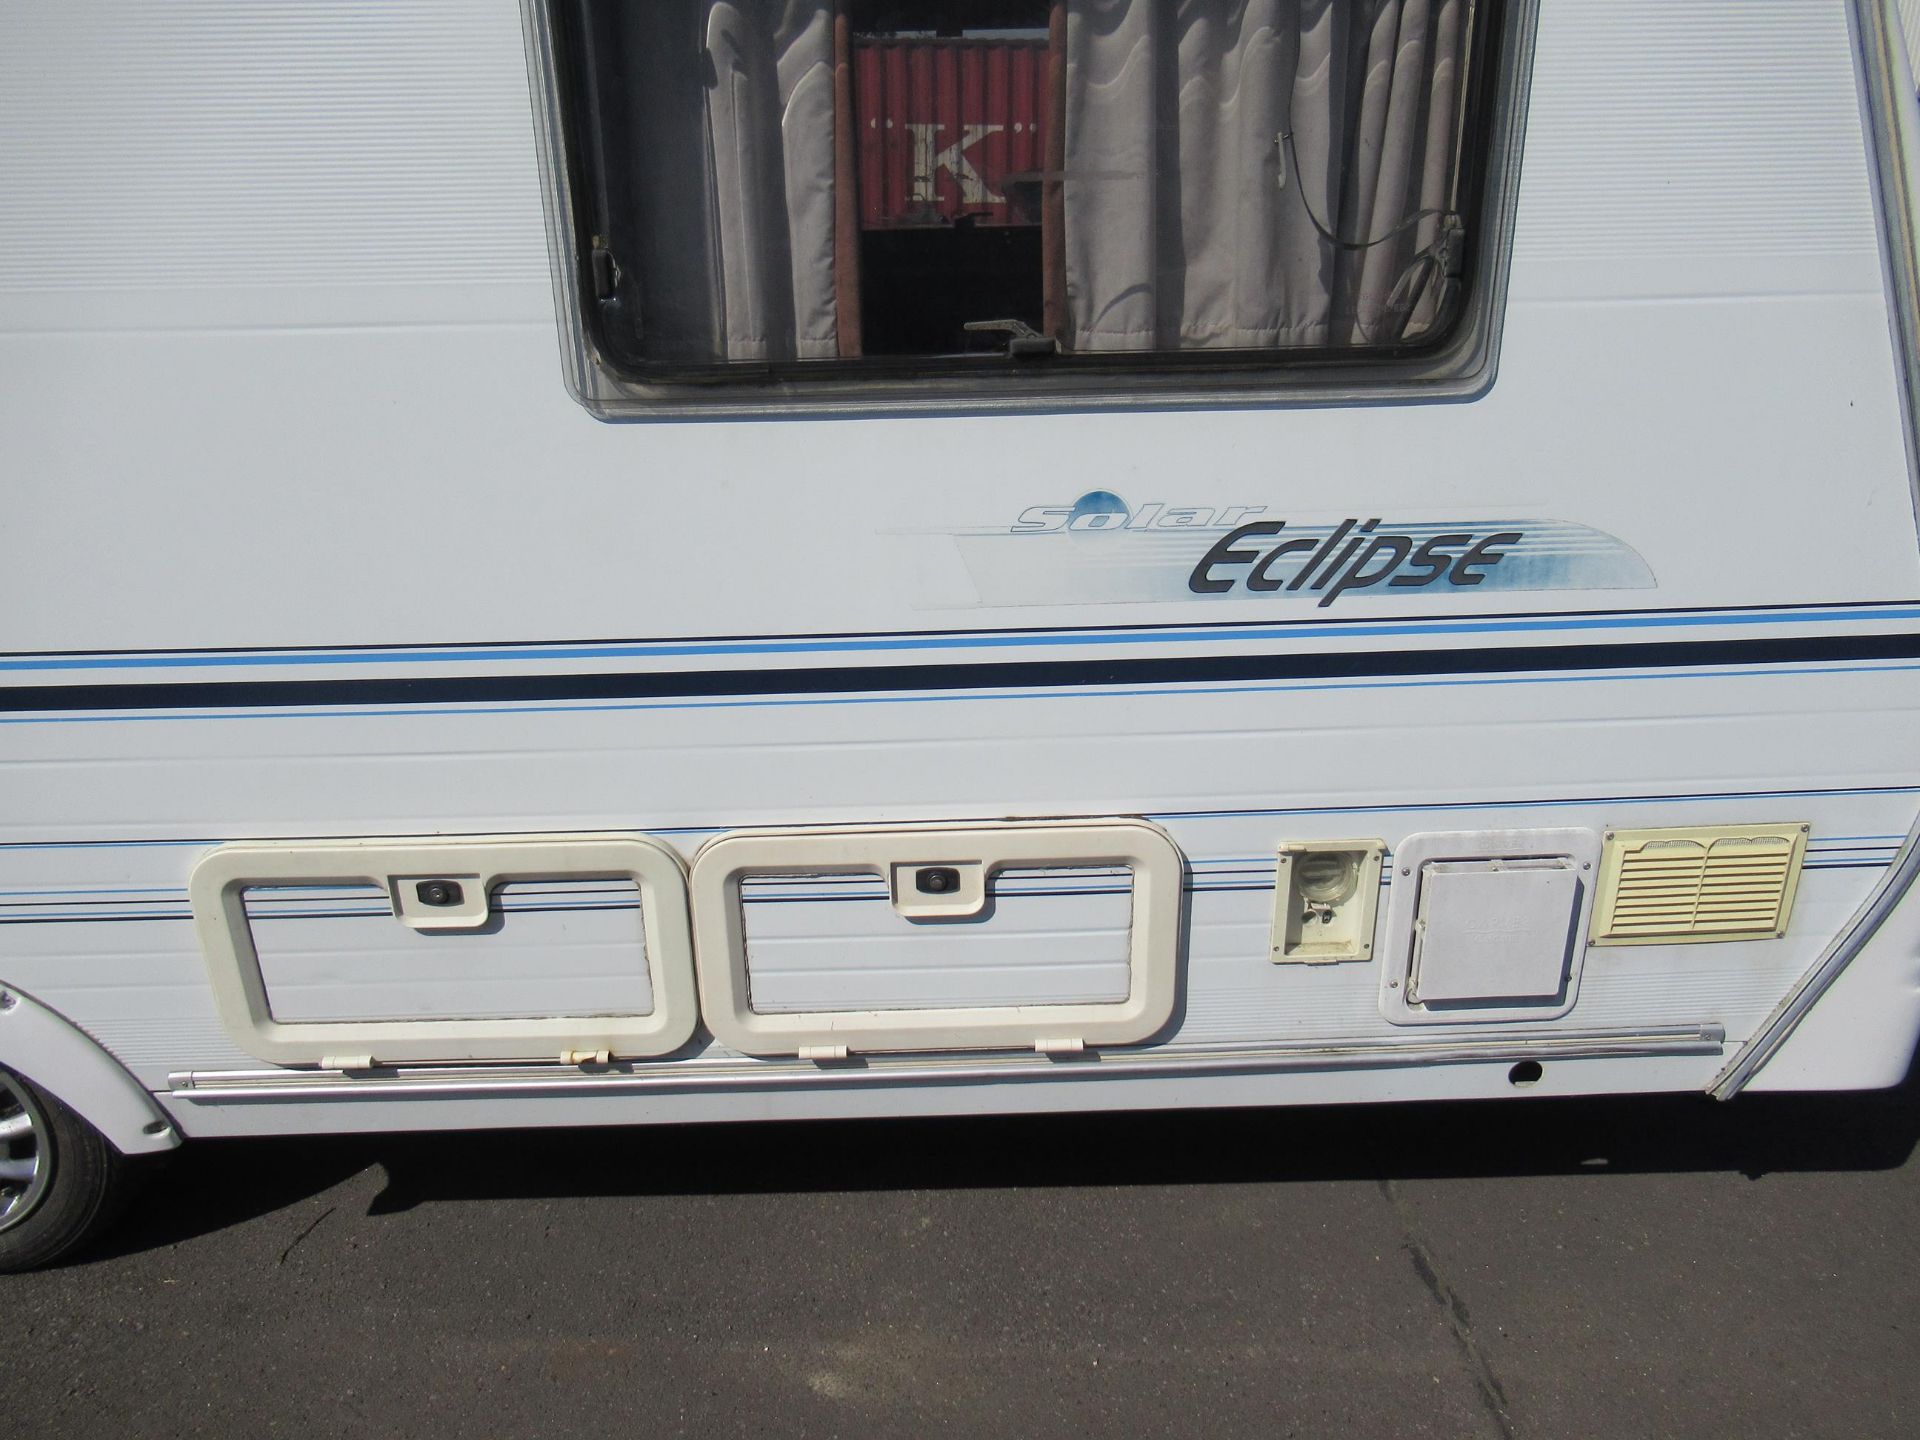 Lunar Solar Eclipse 462 two berth single axle caravan with double/two single beds. - Image 8 of 38